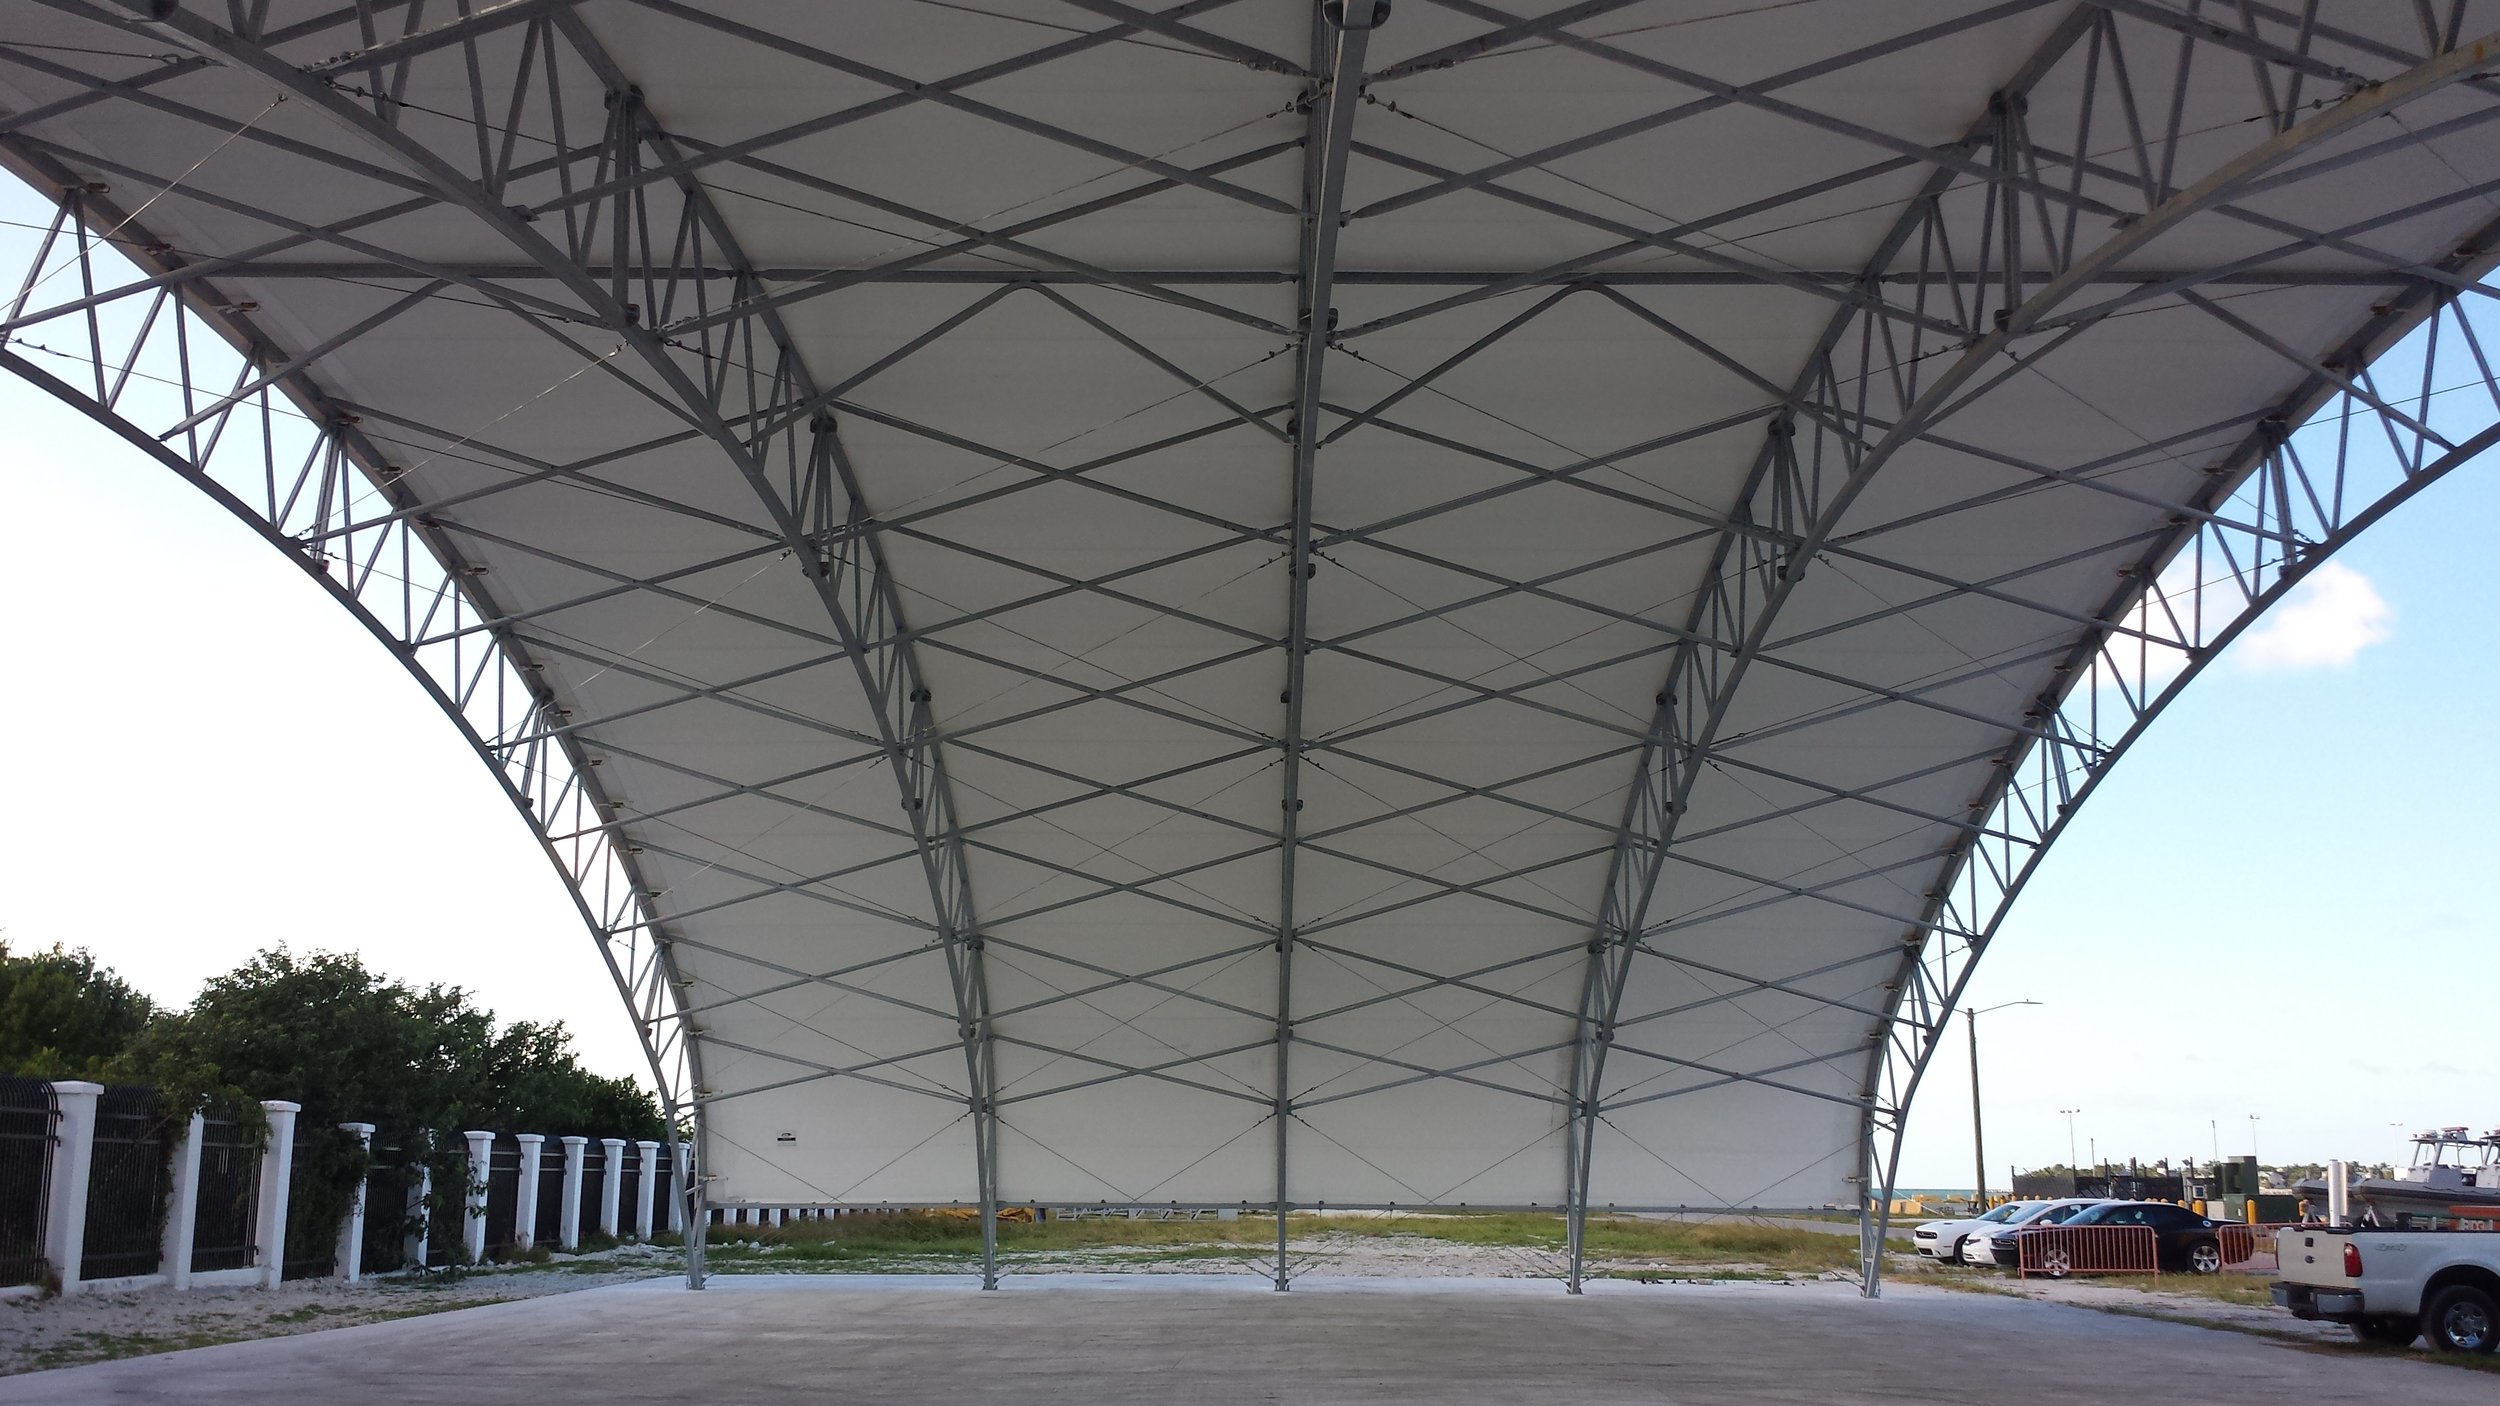 Fabric Structures: Design and Materials